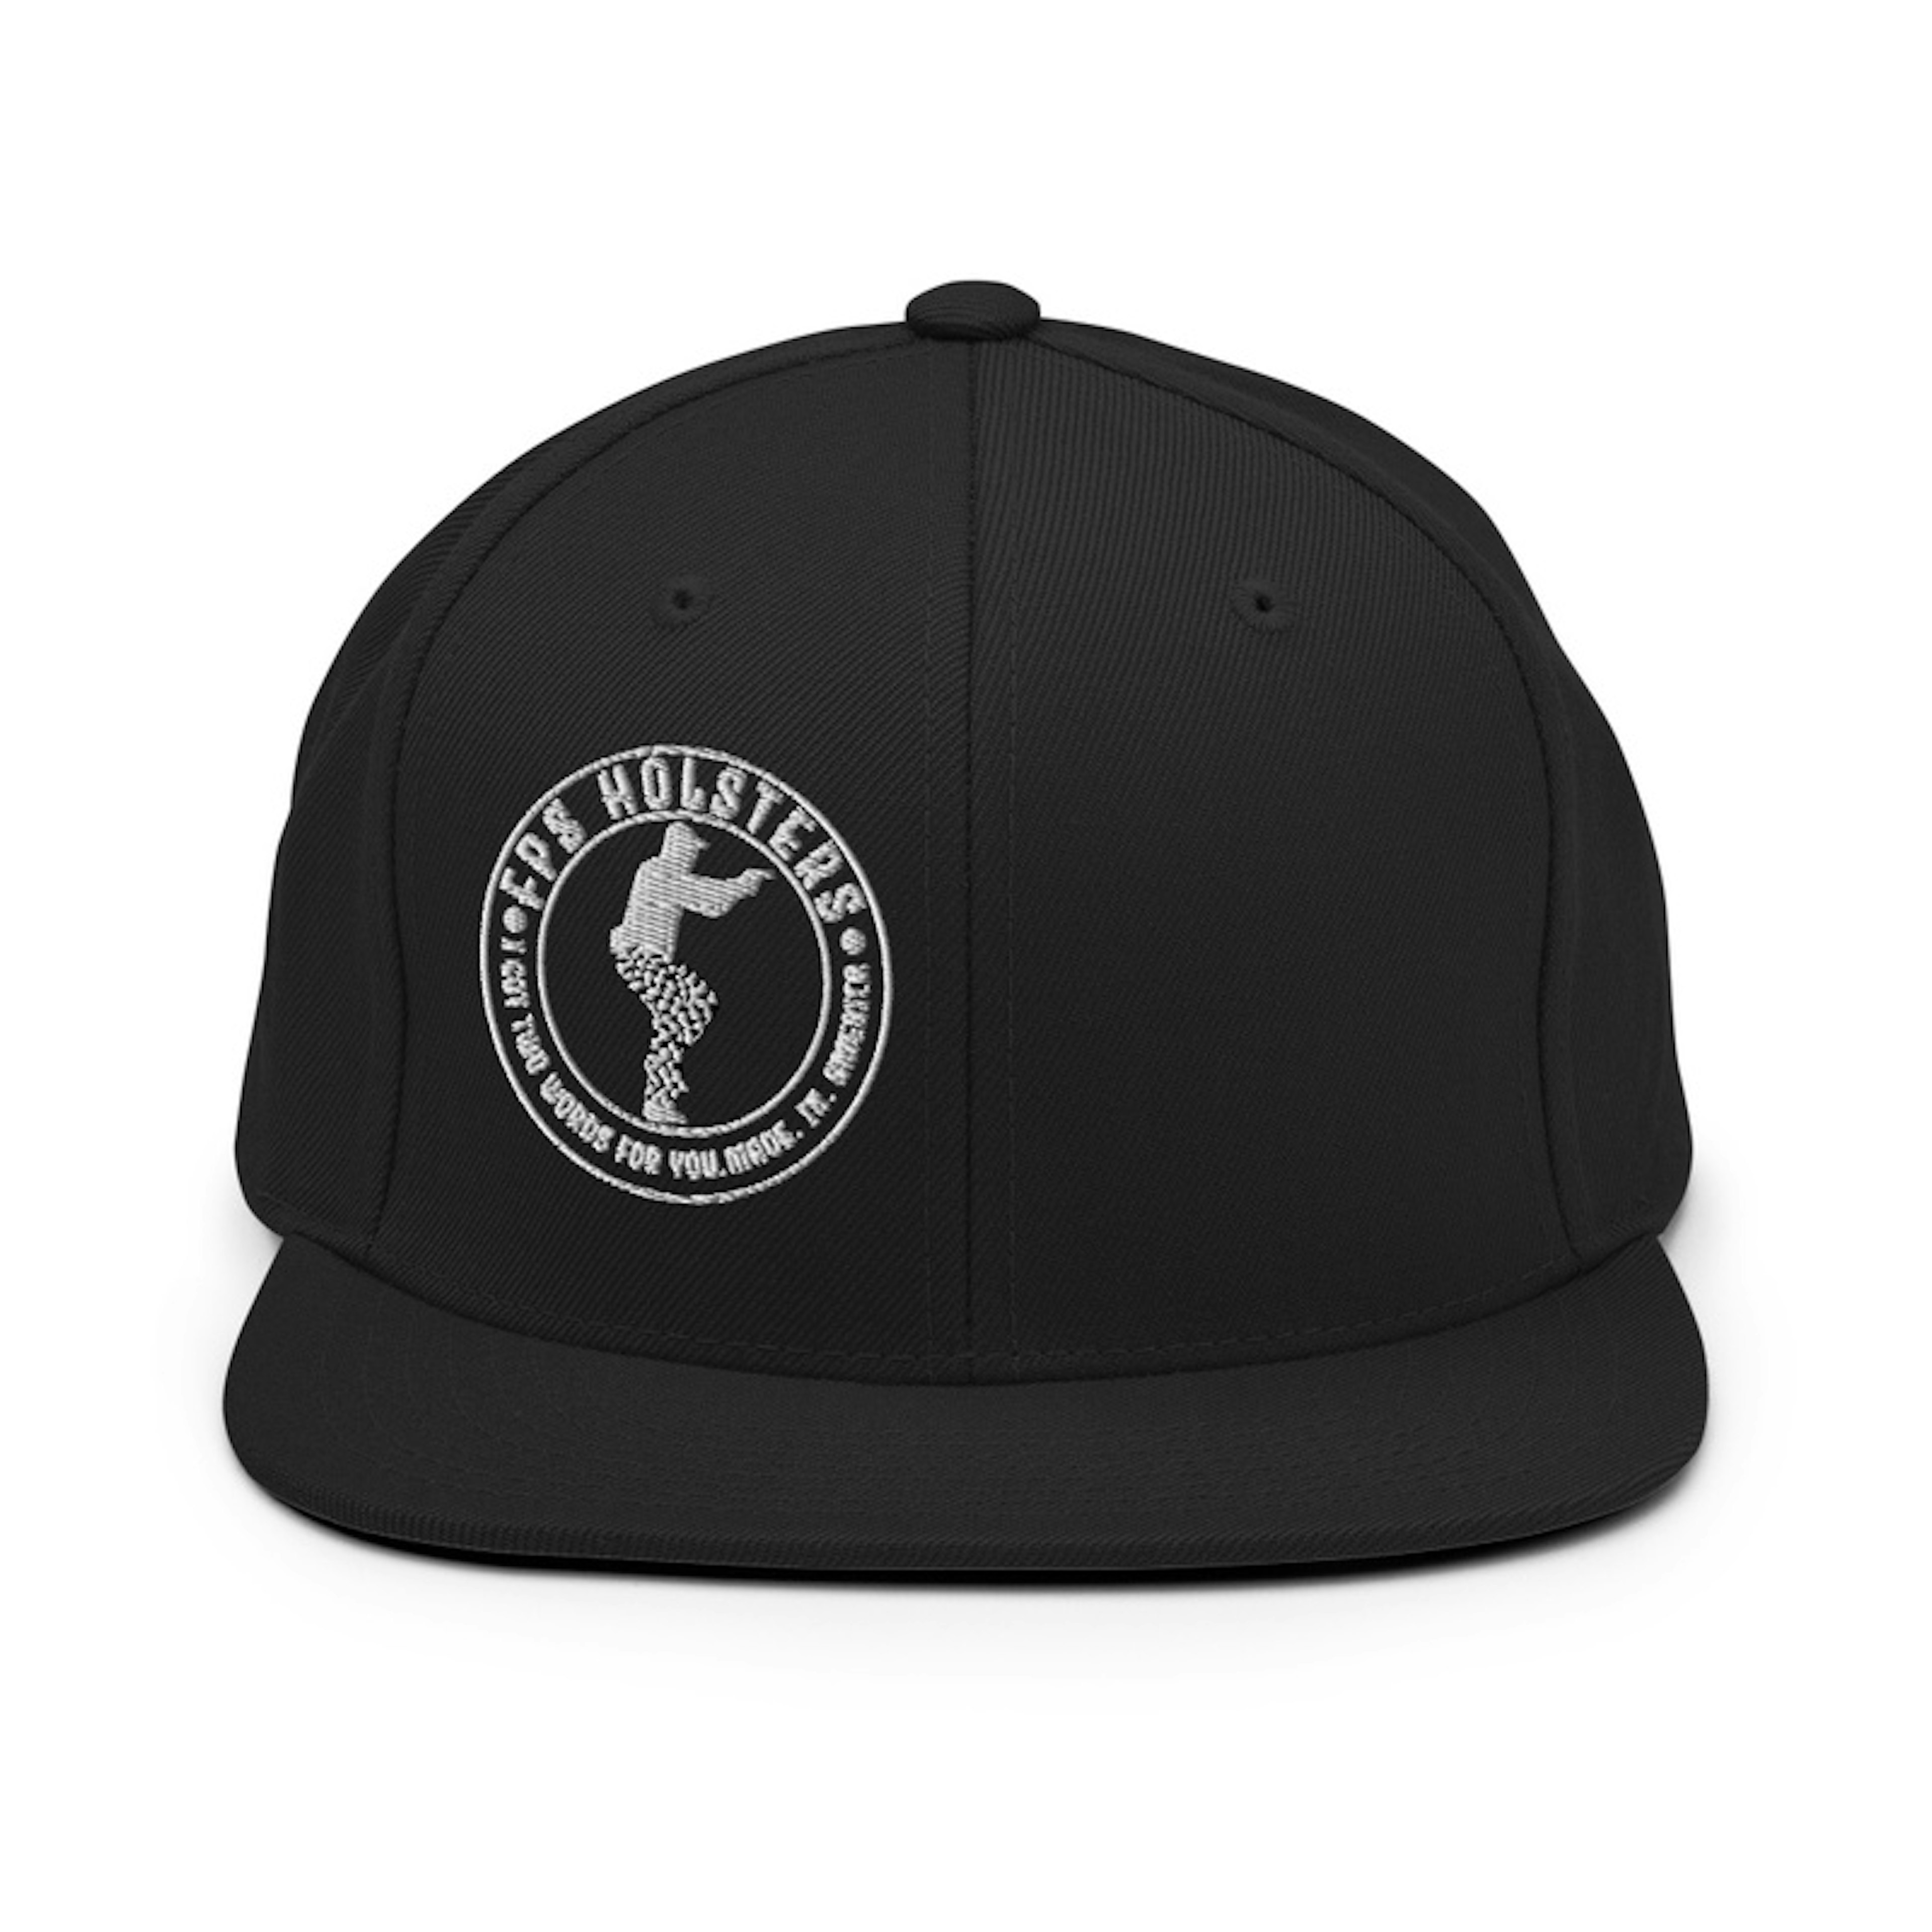 FPS Holsters Hat